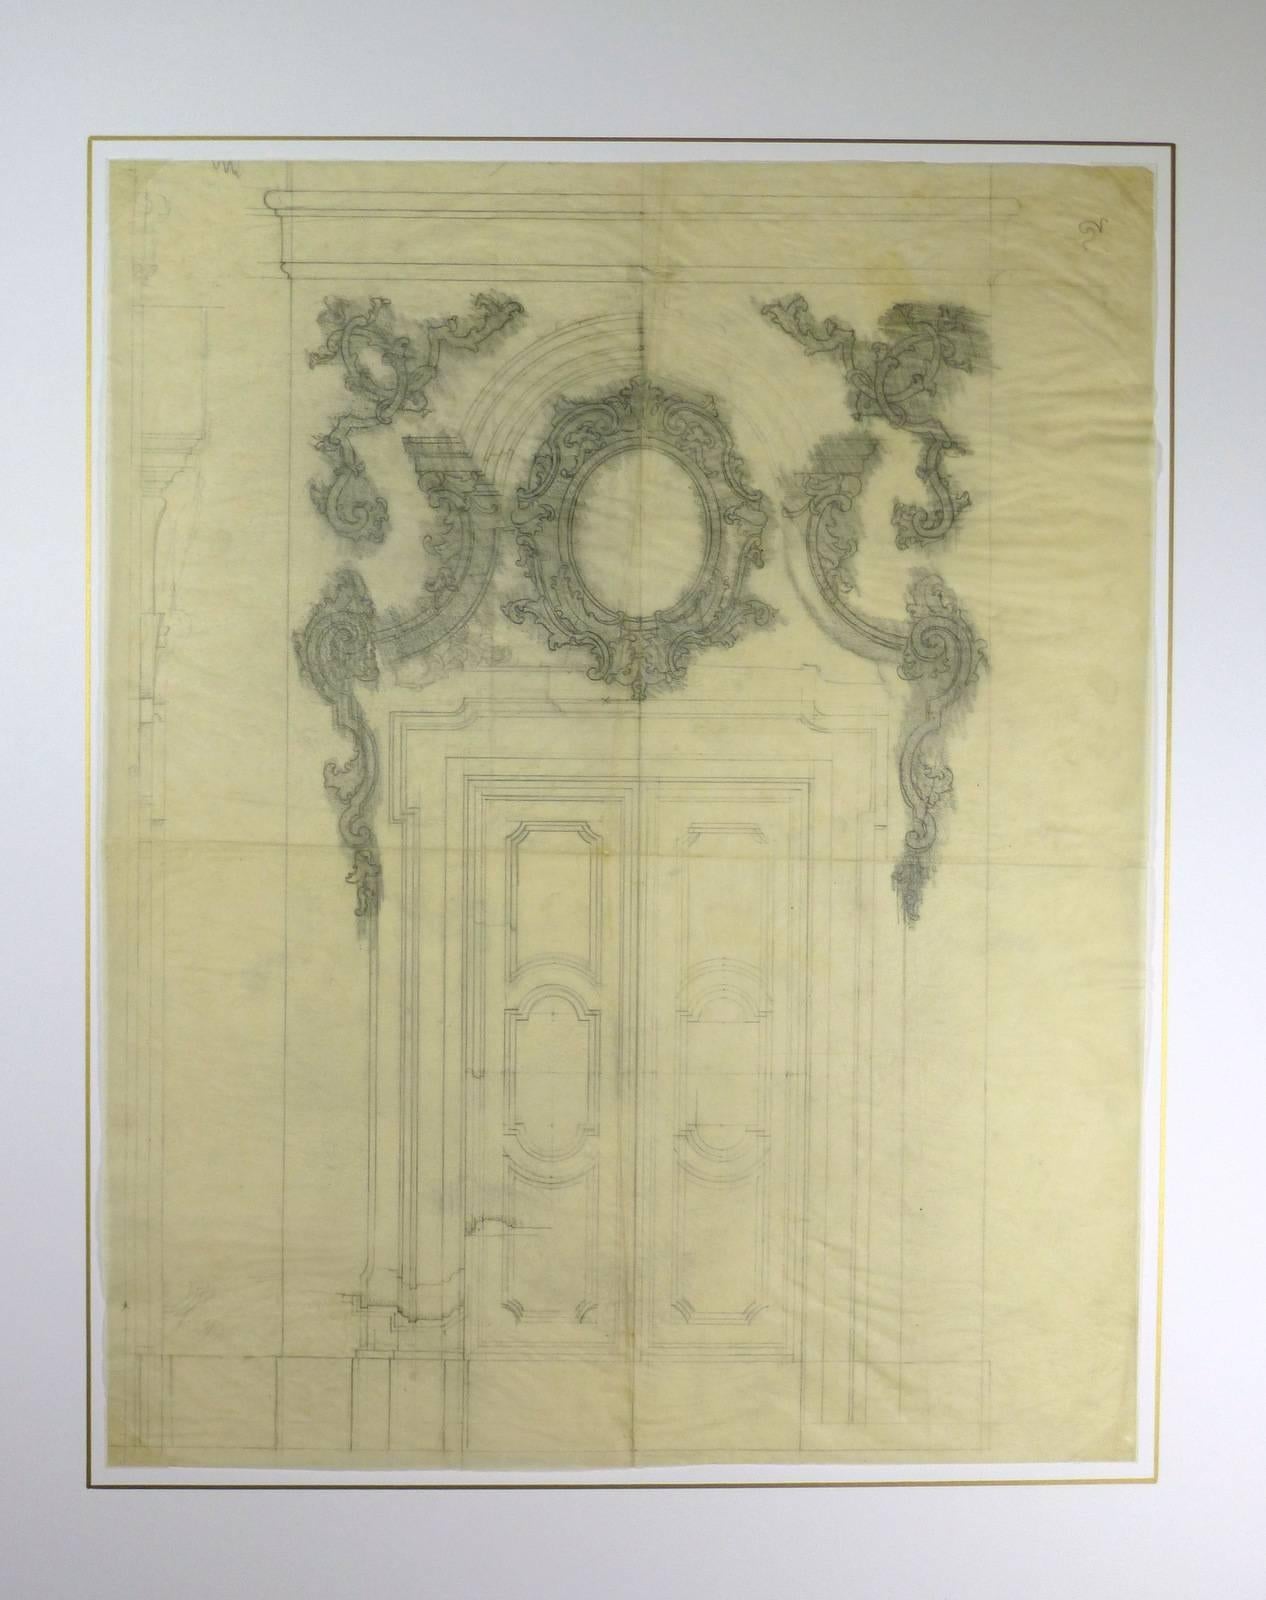 Beautifully detailed early 20th century French pencil drawing on calque of detailed architectural doorway, circa 1910. Folds in paper, very delicate. 

Original artwork on paper displayed on a white mat with a gold border. Mat fits a standard-size